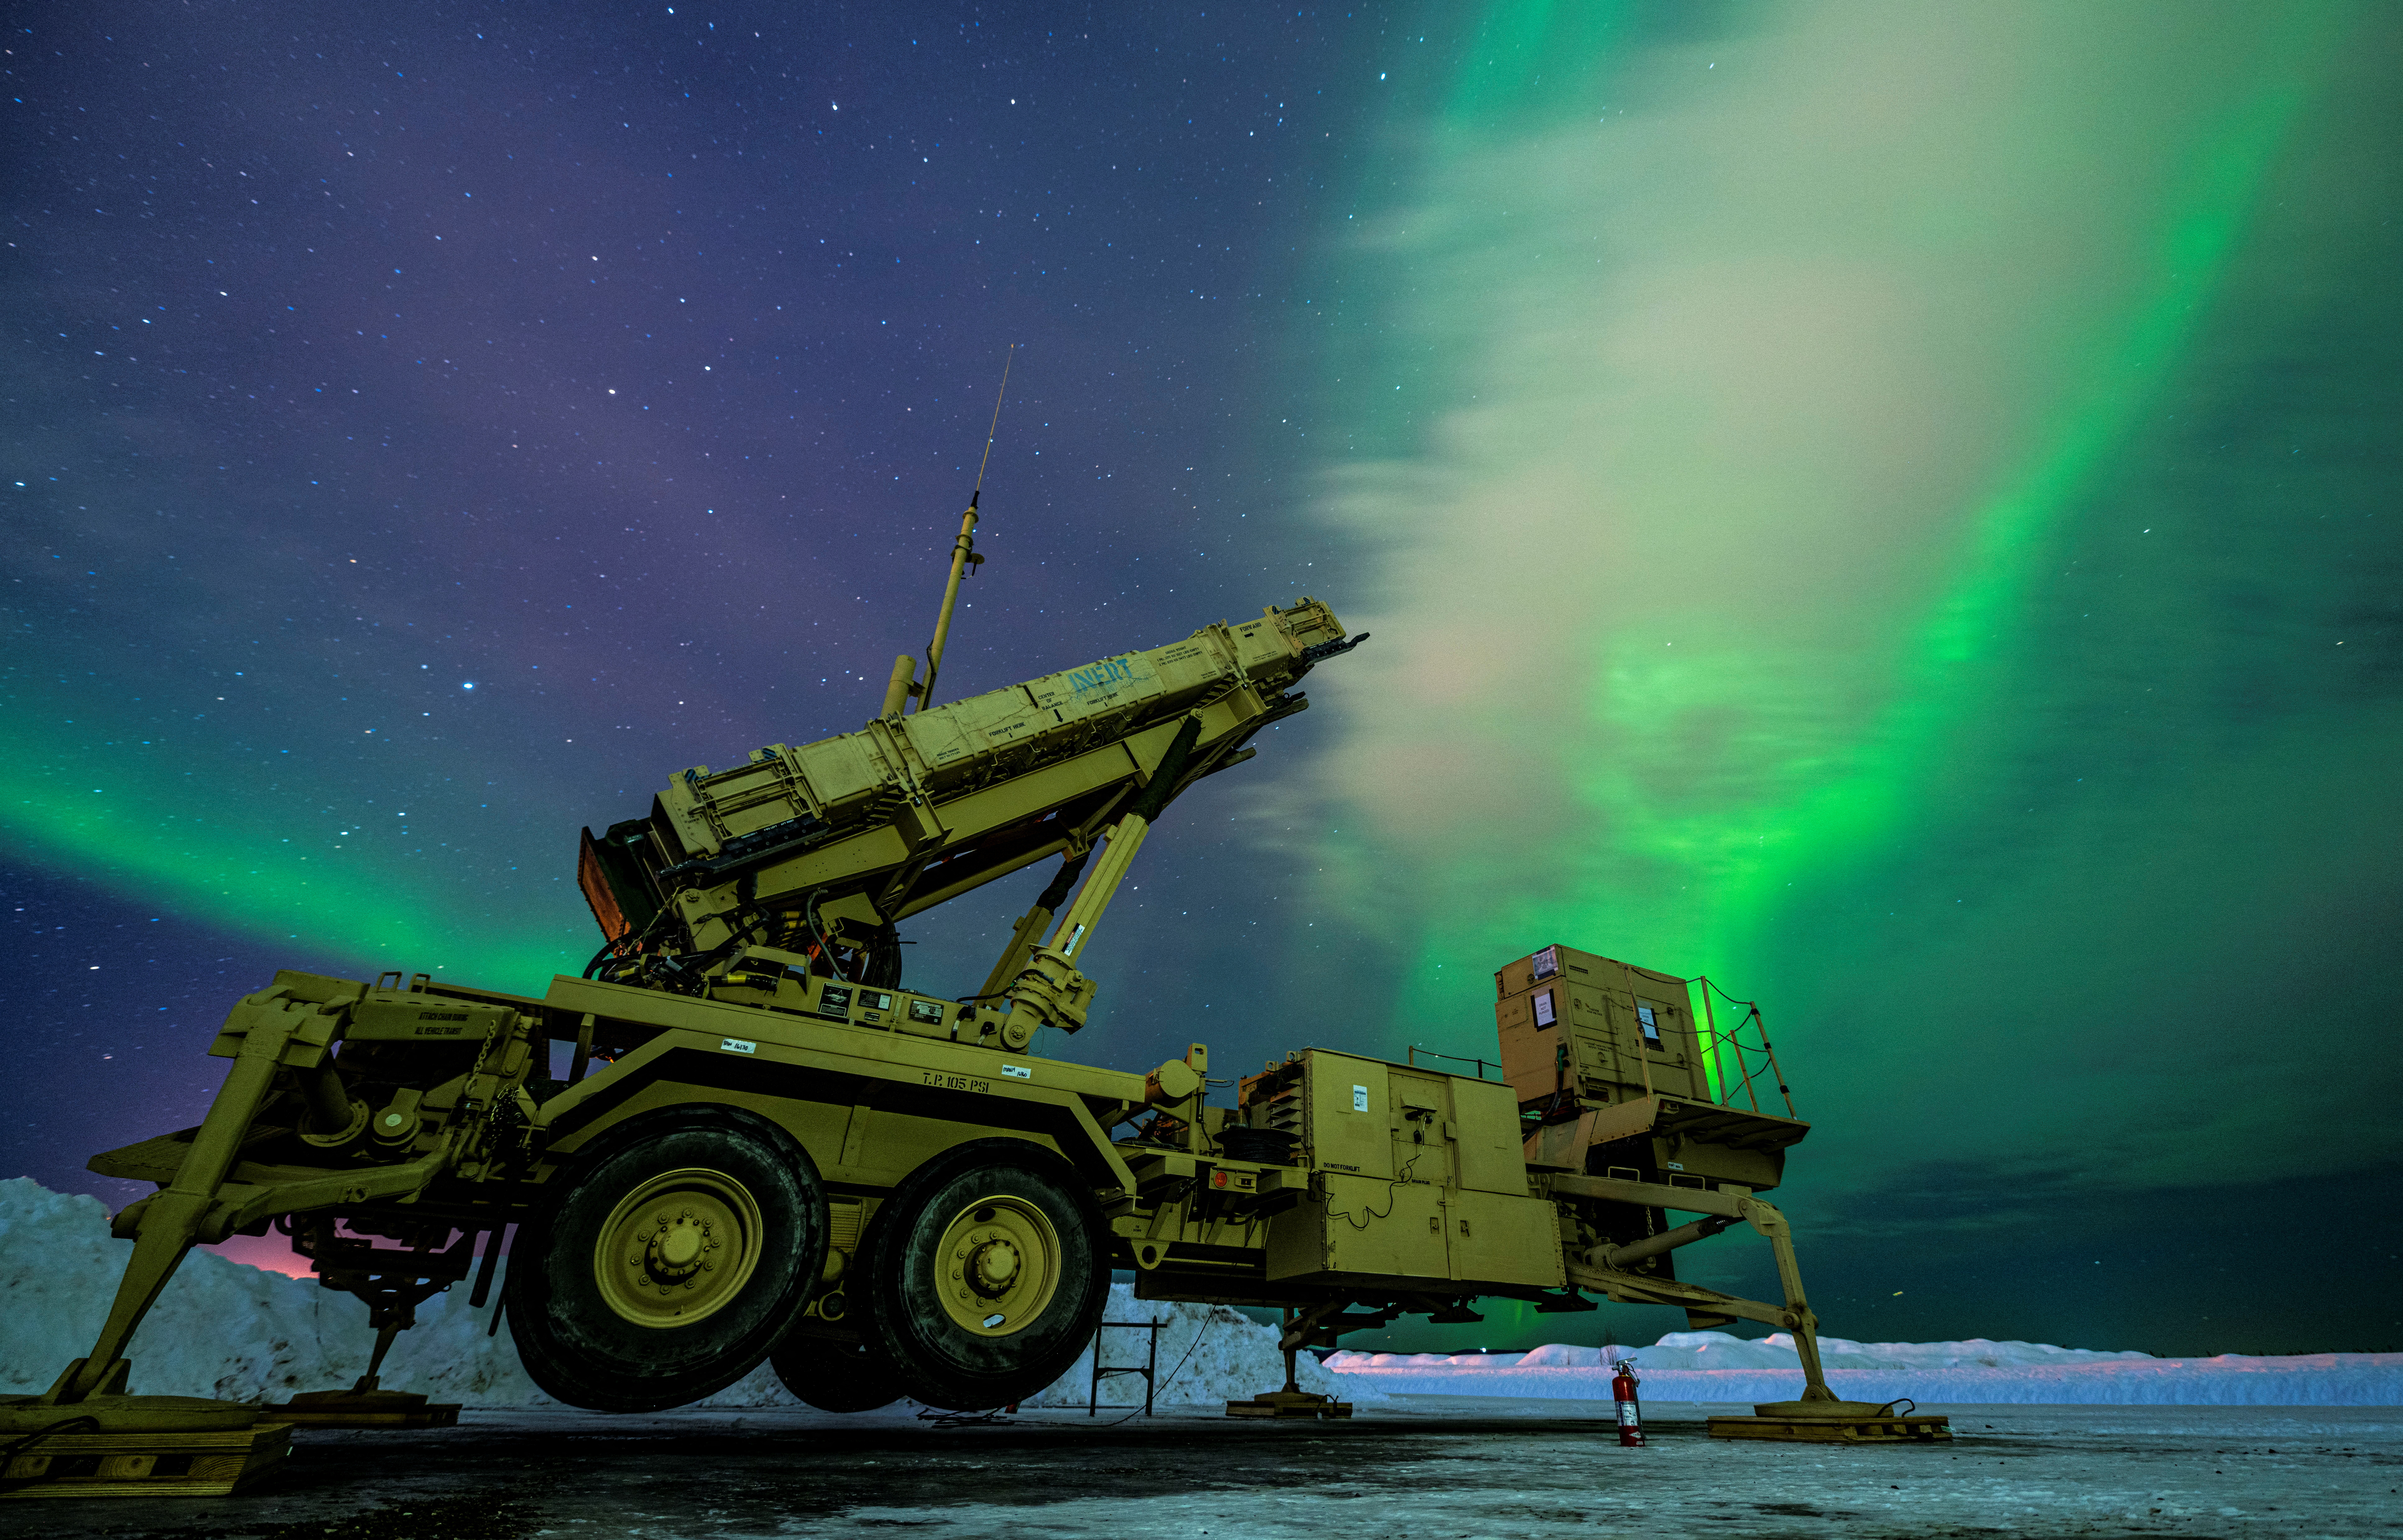 The northern lights glow behind a Patriot missile M903 launcher station in Alaska